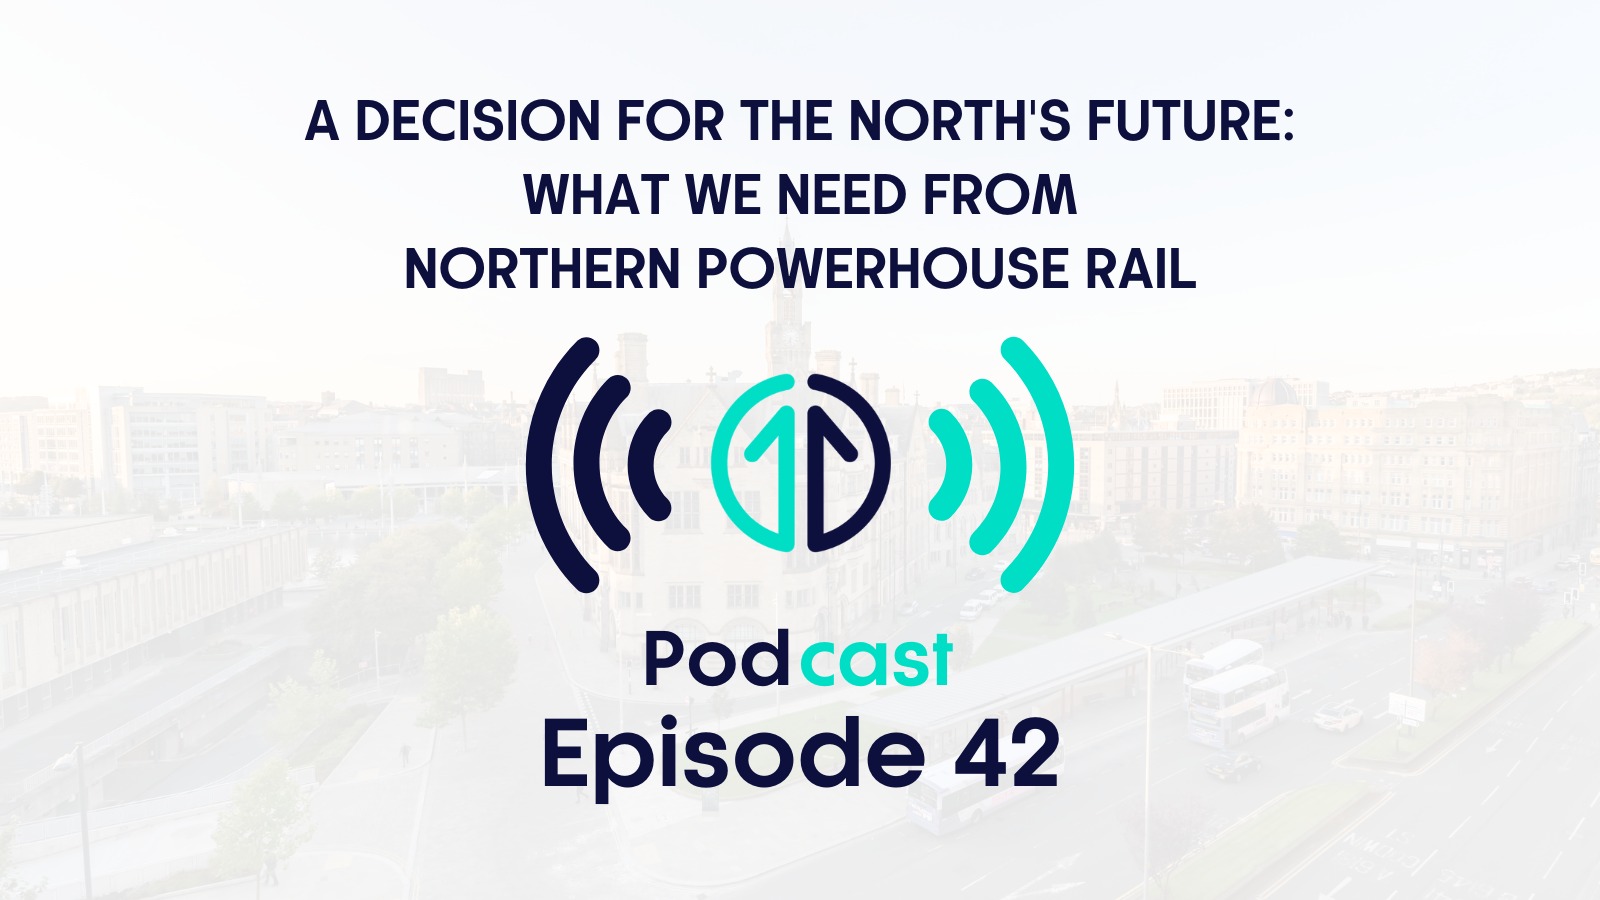 A decision for the North's future: What we need from Northern Powerhouse Rail | Episode 42